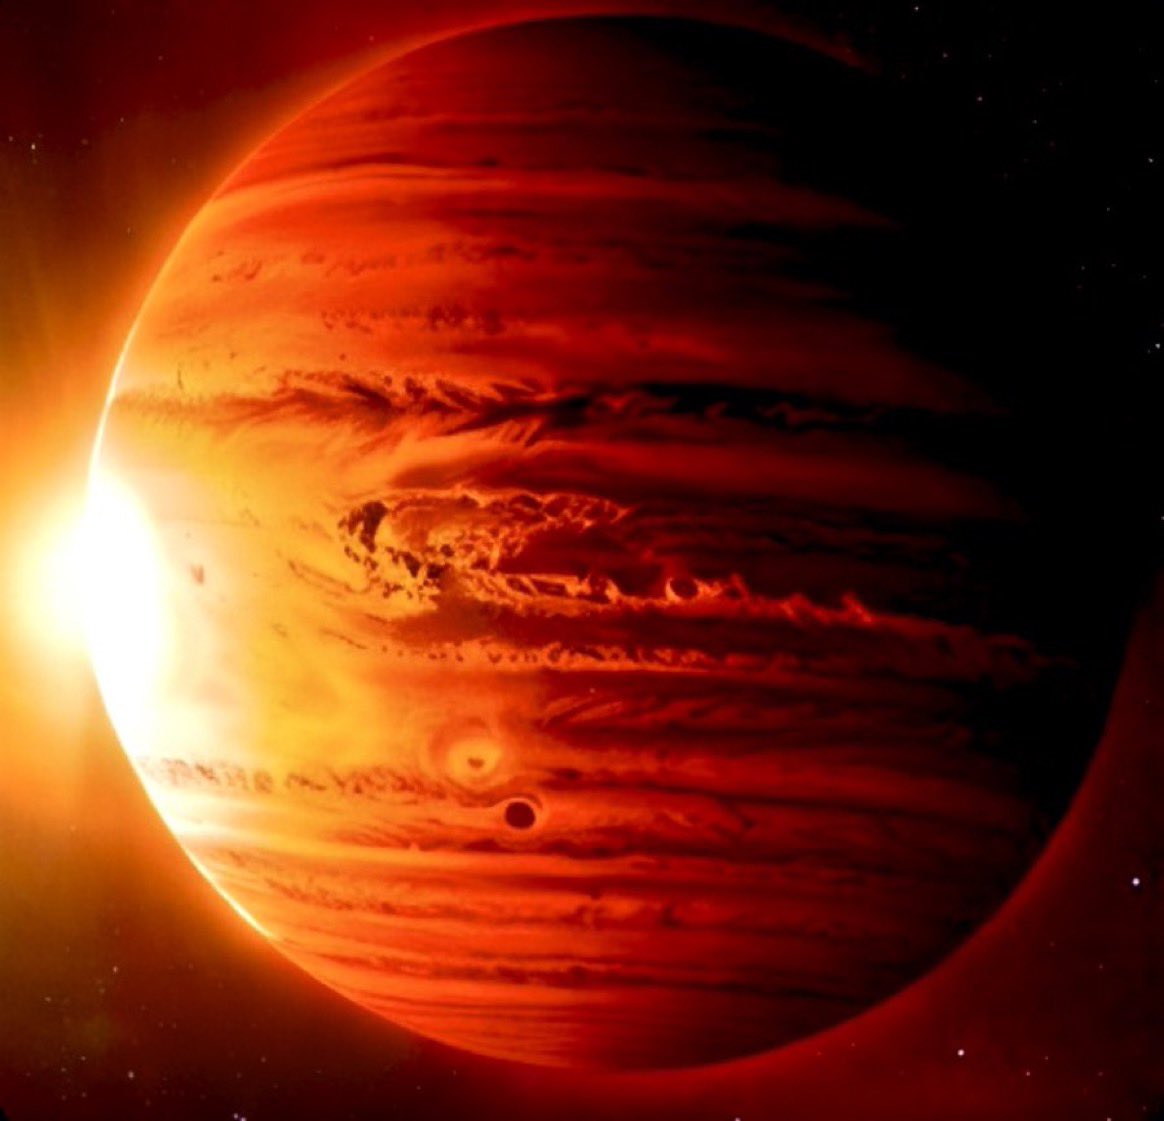 Exoplanet HD 80606b is terrifyingly hellish. With a mass 4x larger than Jupiter, it’s also scorching hot. Its elliptical orbit brings it point-blank with its star, causing drastic temperature changes. This sudden heat creates immense superstorms, with winds eclipsing 11,000 mph!